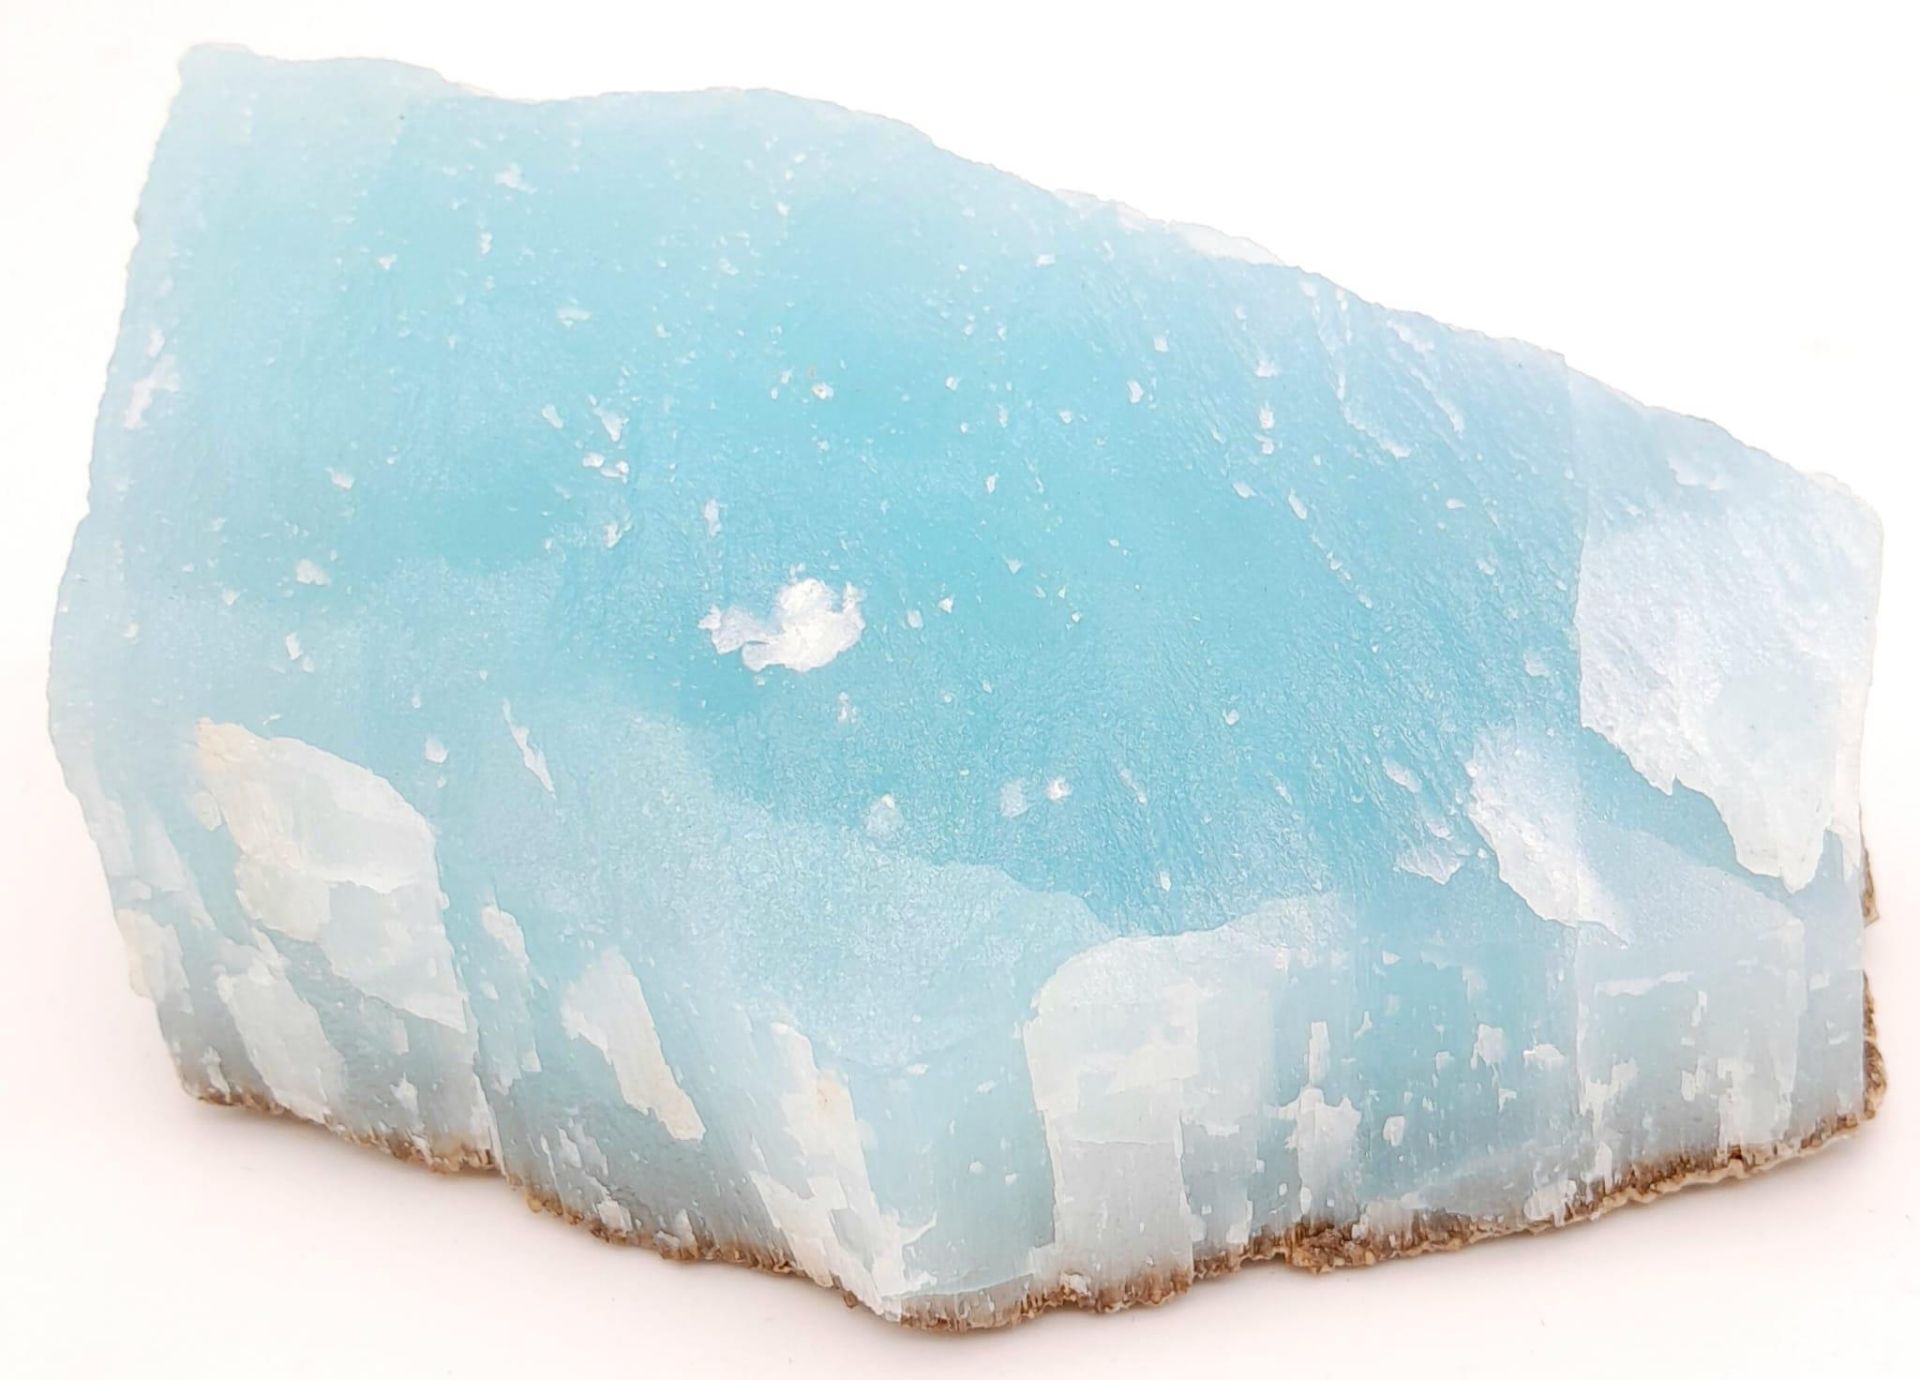 A rare, large specimen of Aragonite with a spectacular bluish-green colour due to its proximity to